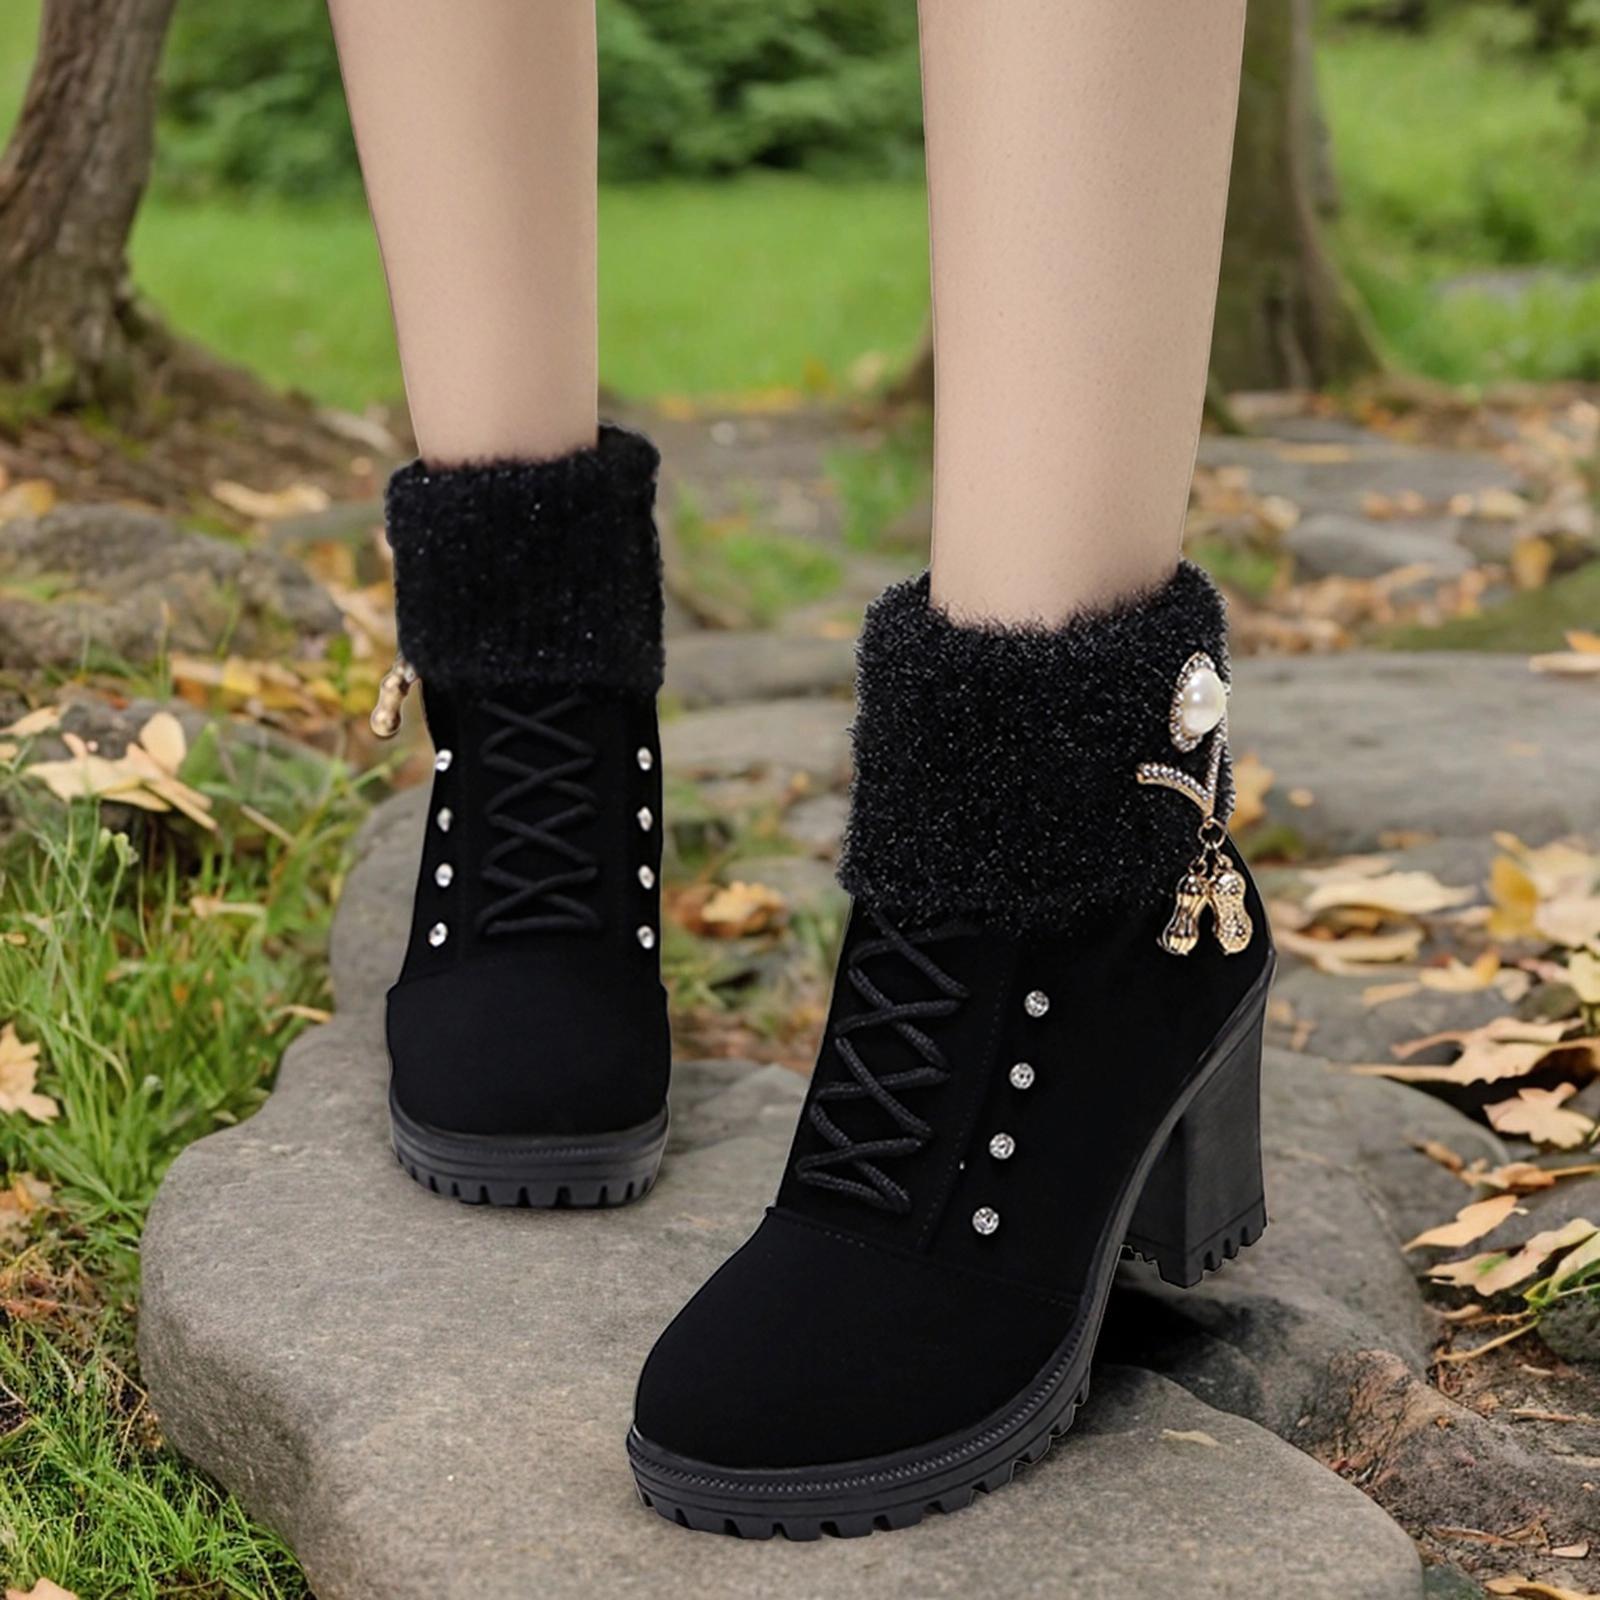 Women Winter Boots Cold Weather High Heeled with Zipper Closure Trendy Shoes